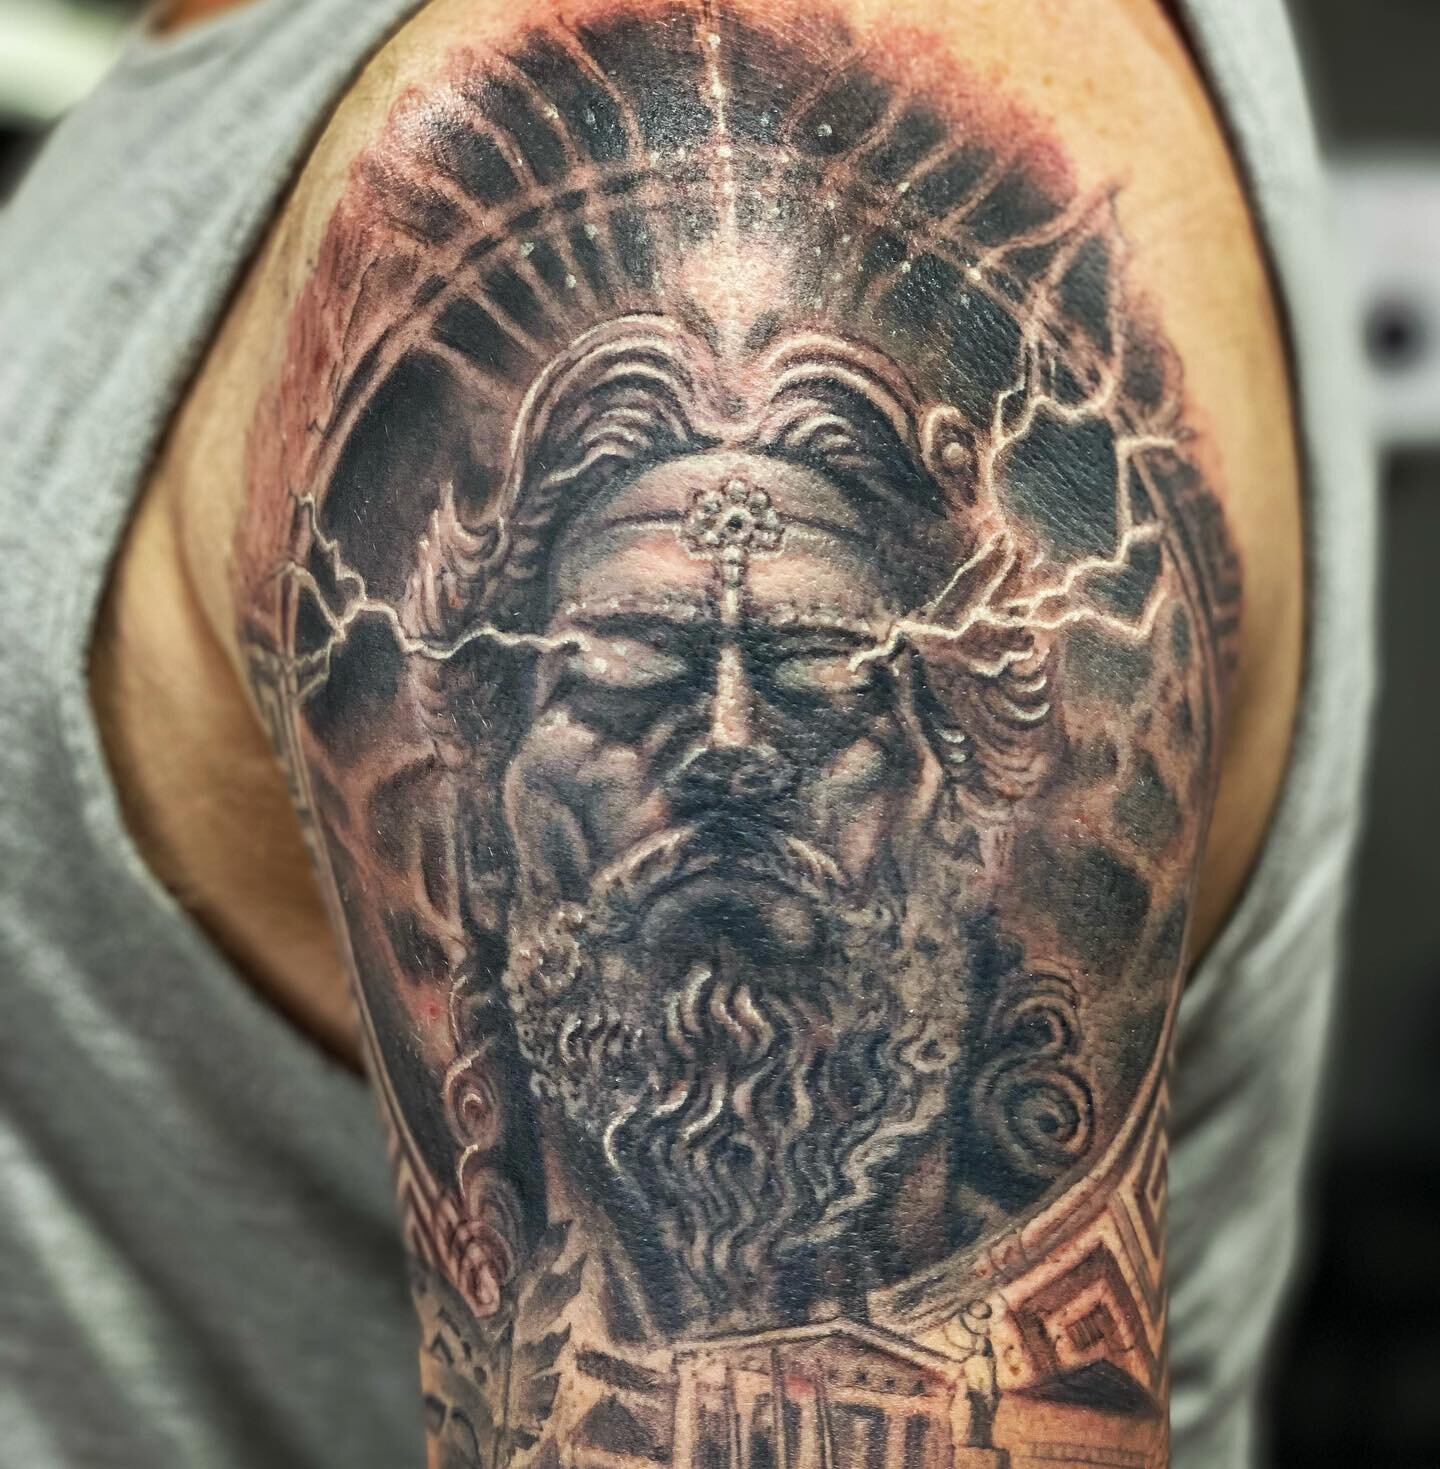 Top part of a sleeve I&rsquo;m working on&hellip;more to come. 
Cheers Ben
#blackandgreytattoo #tattoo #zeus #tattooed #blackandgrey #worthingtattoo #brightontattoo